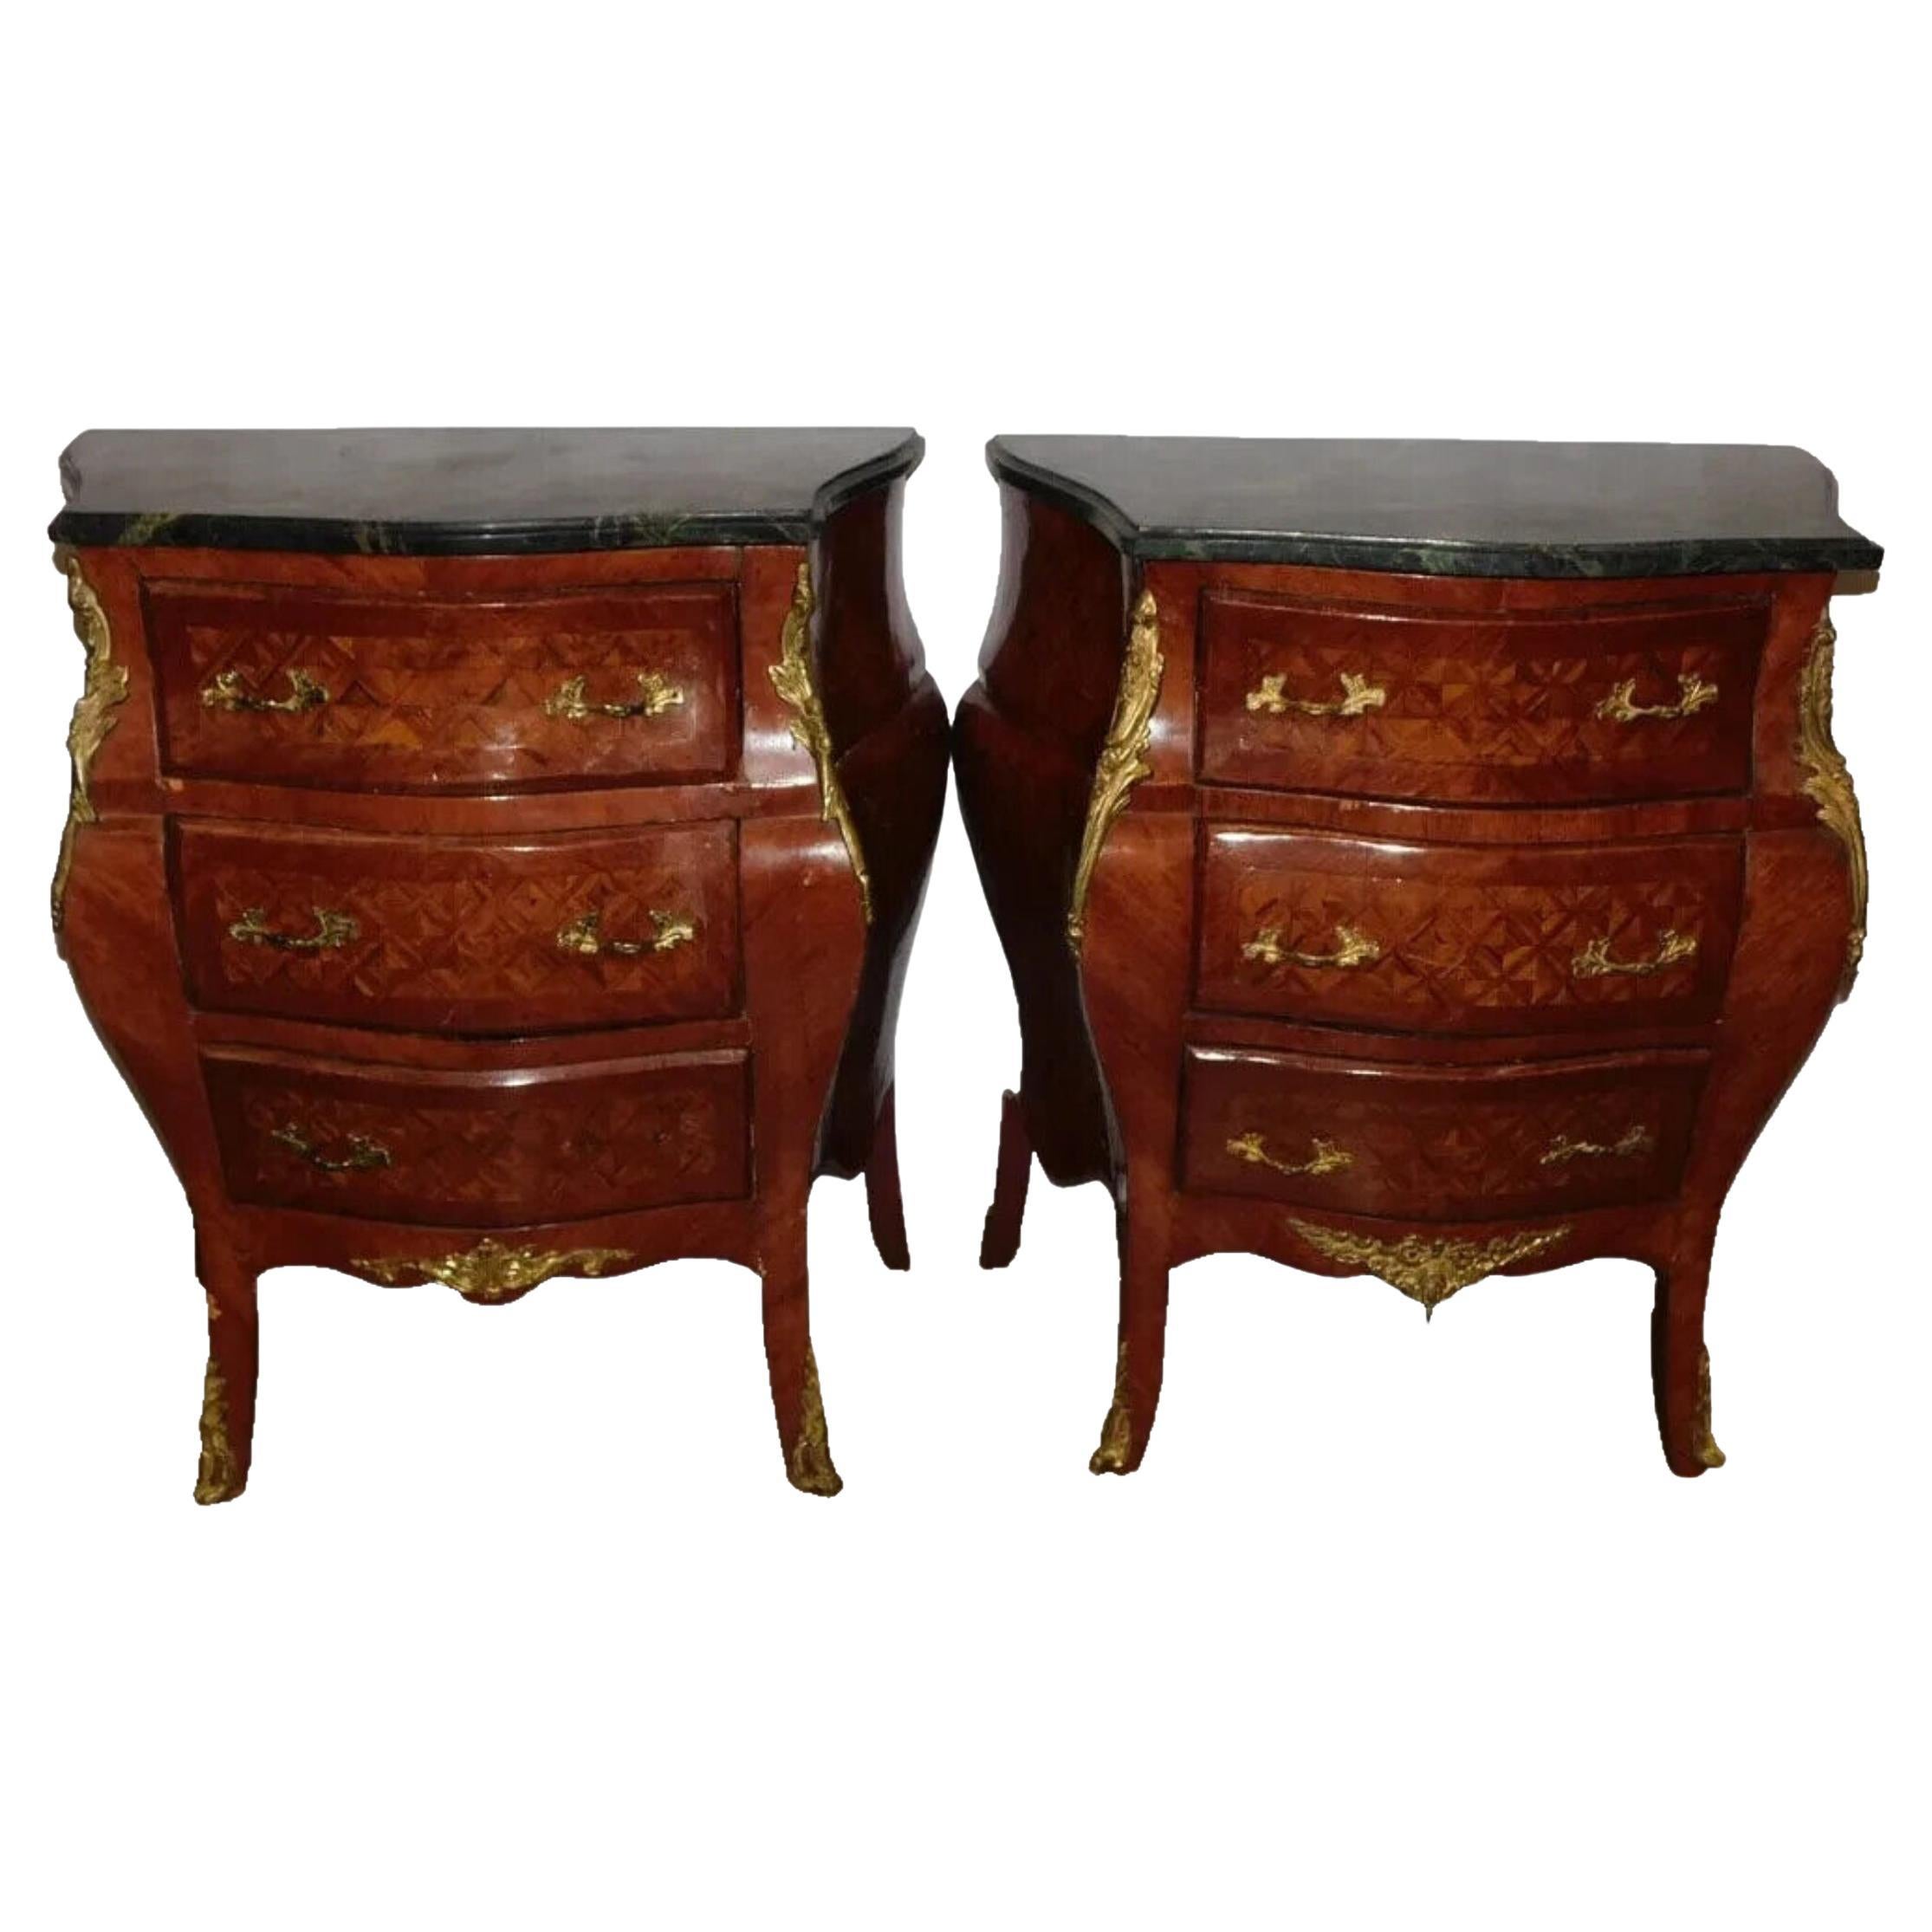 20th C. Walnut Inlay, Marble Top, Diminutive, With Bronze Commodes, Set of Two! For Sale